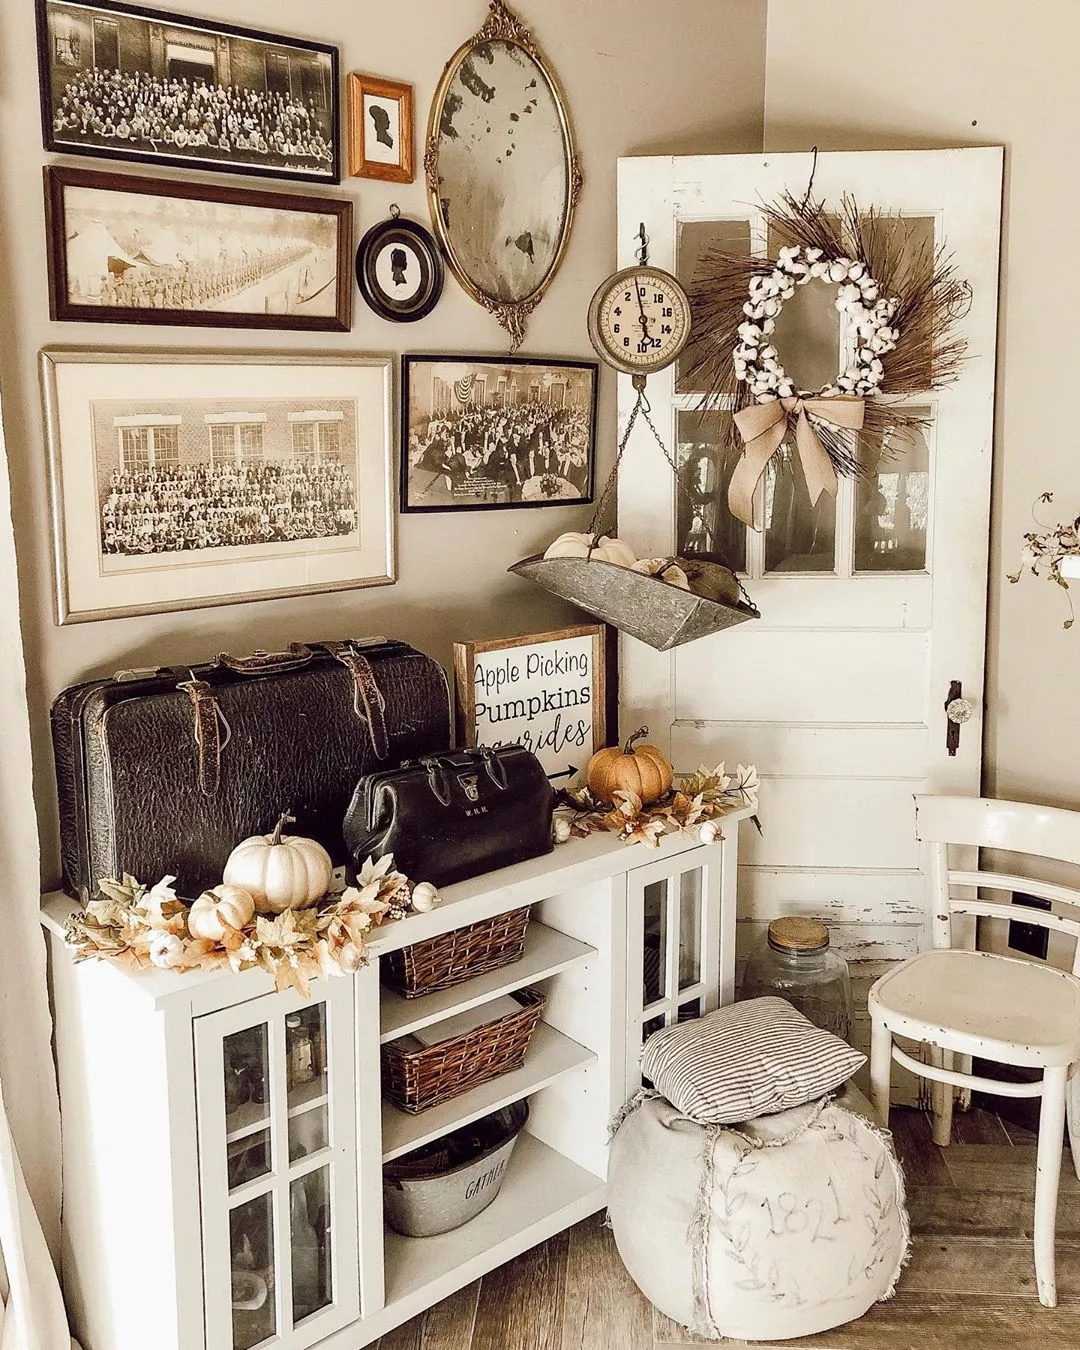 Revamp Your Home With These Vintage Decorating Ideas!